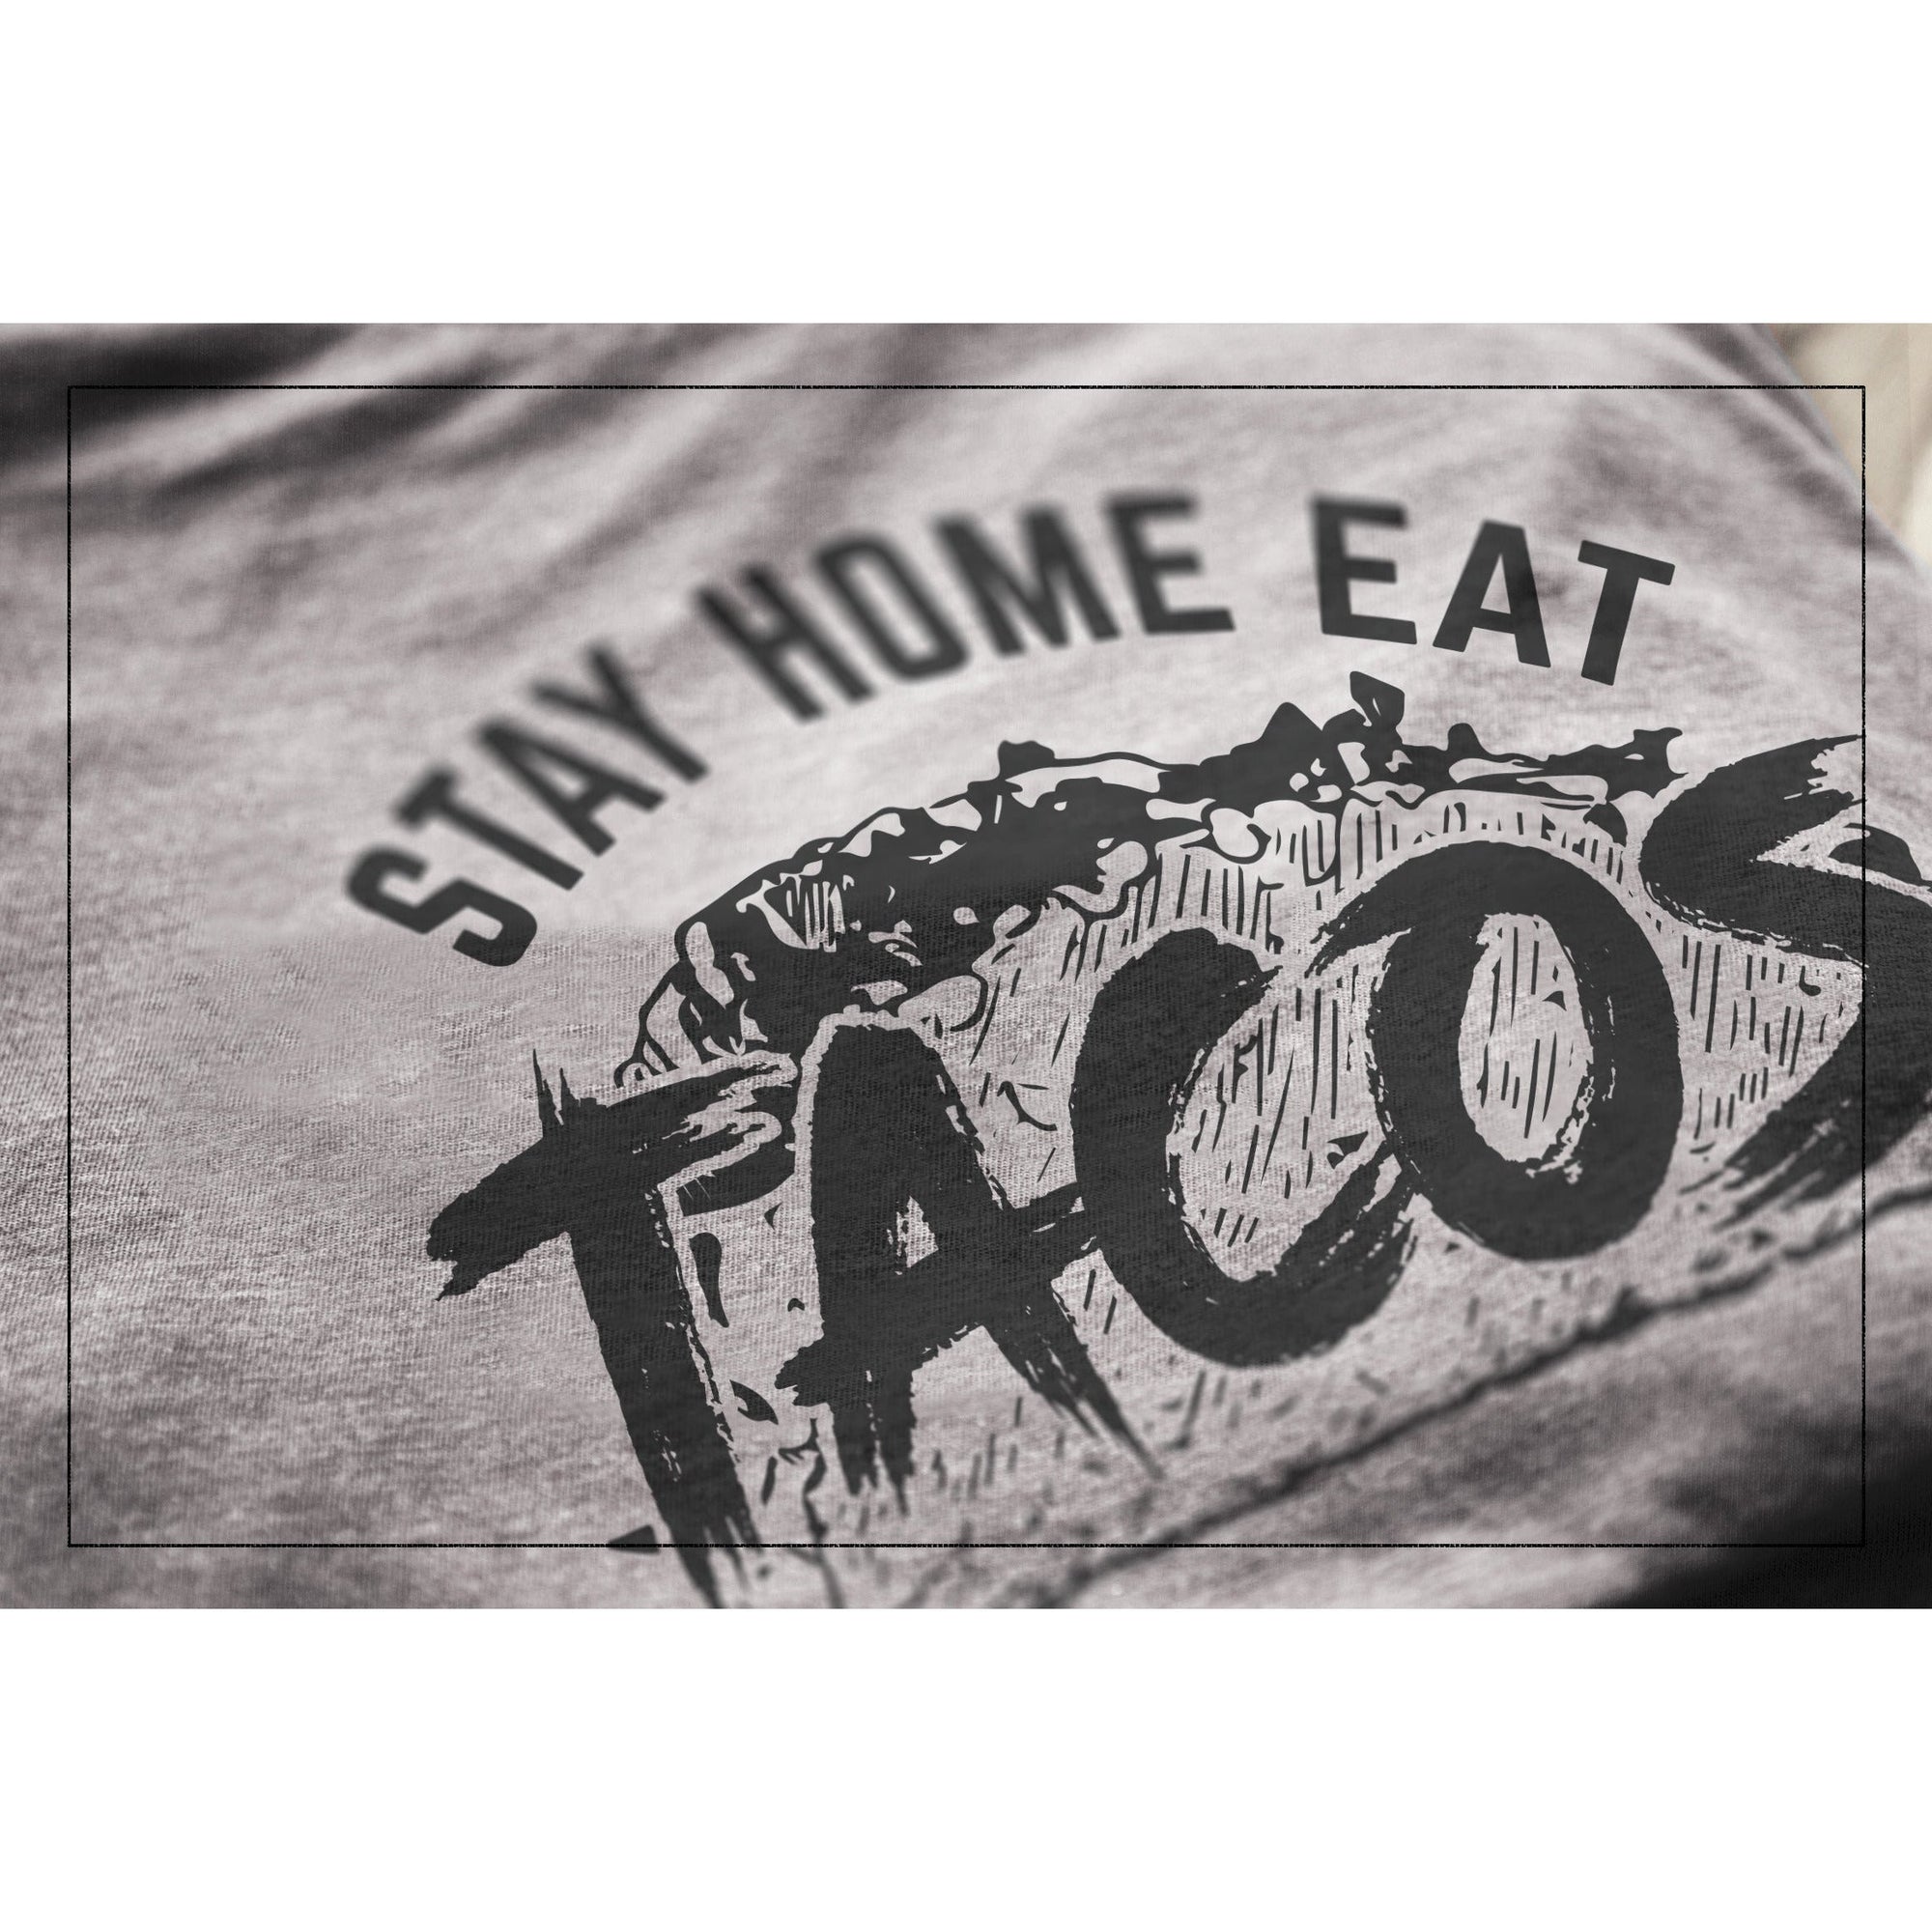 Stay Home Eat Taco - Stories You Can Wear